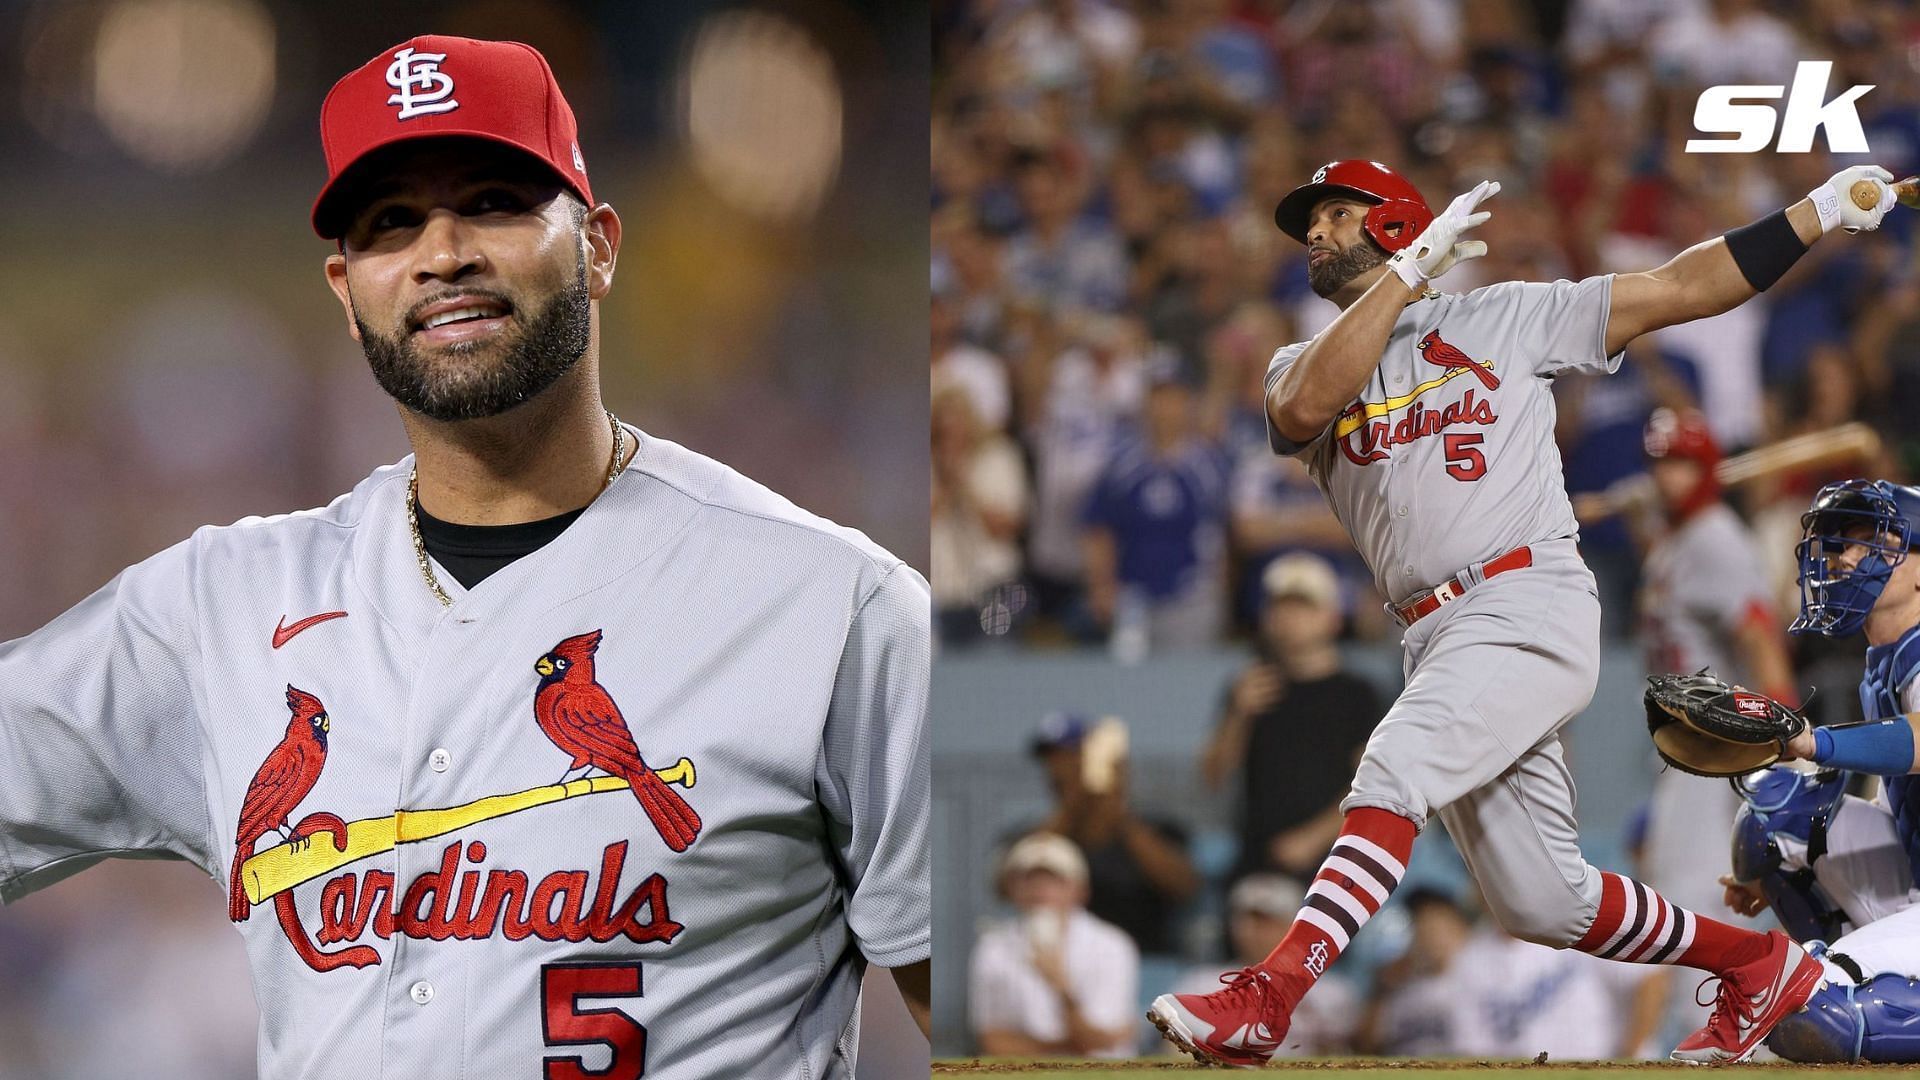 Albert Pujols is set to become the new manager of Leones del Escogido of the Dominican Winter League